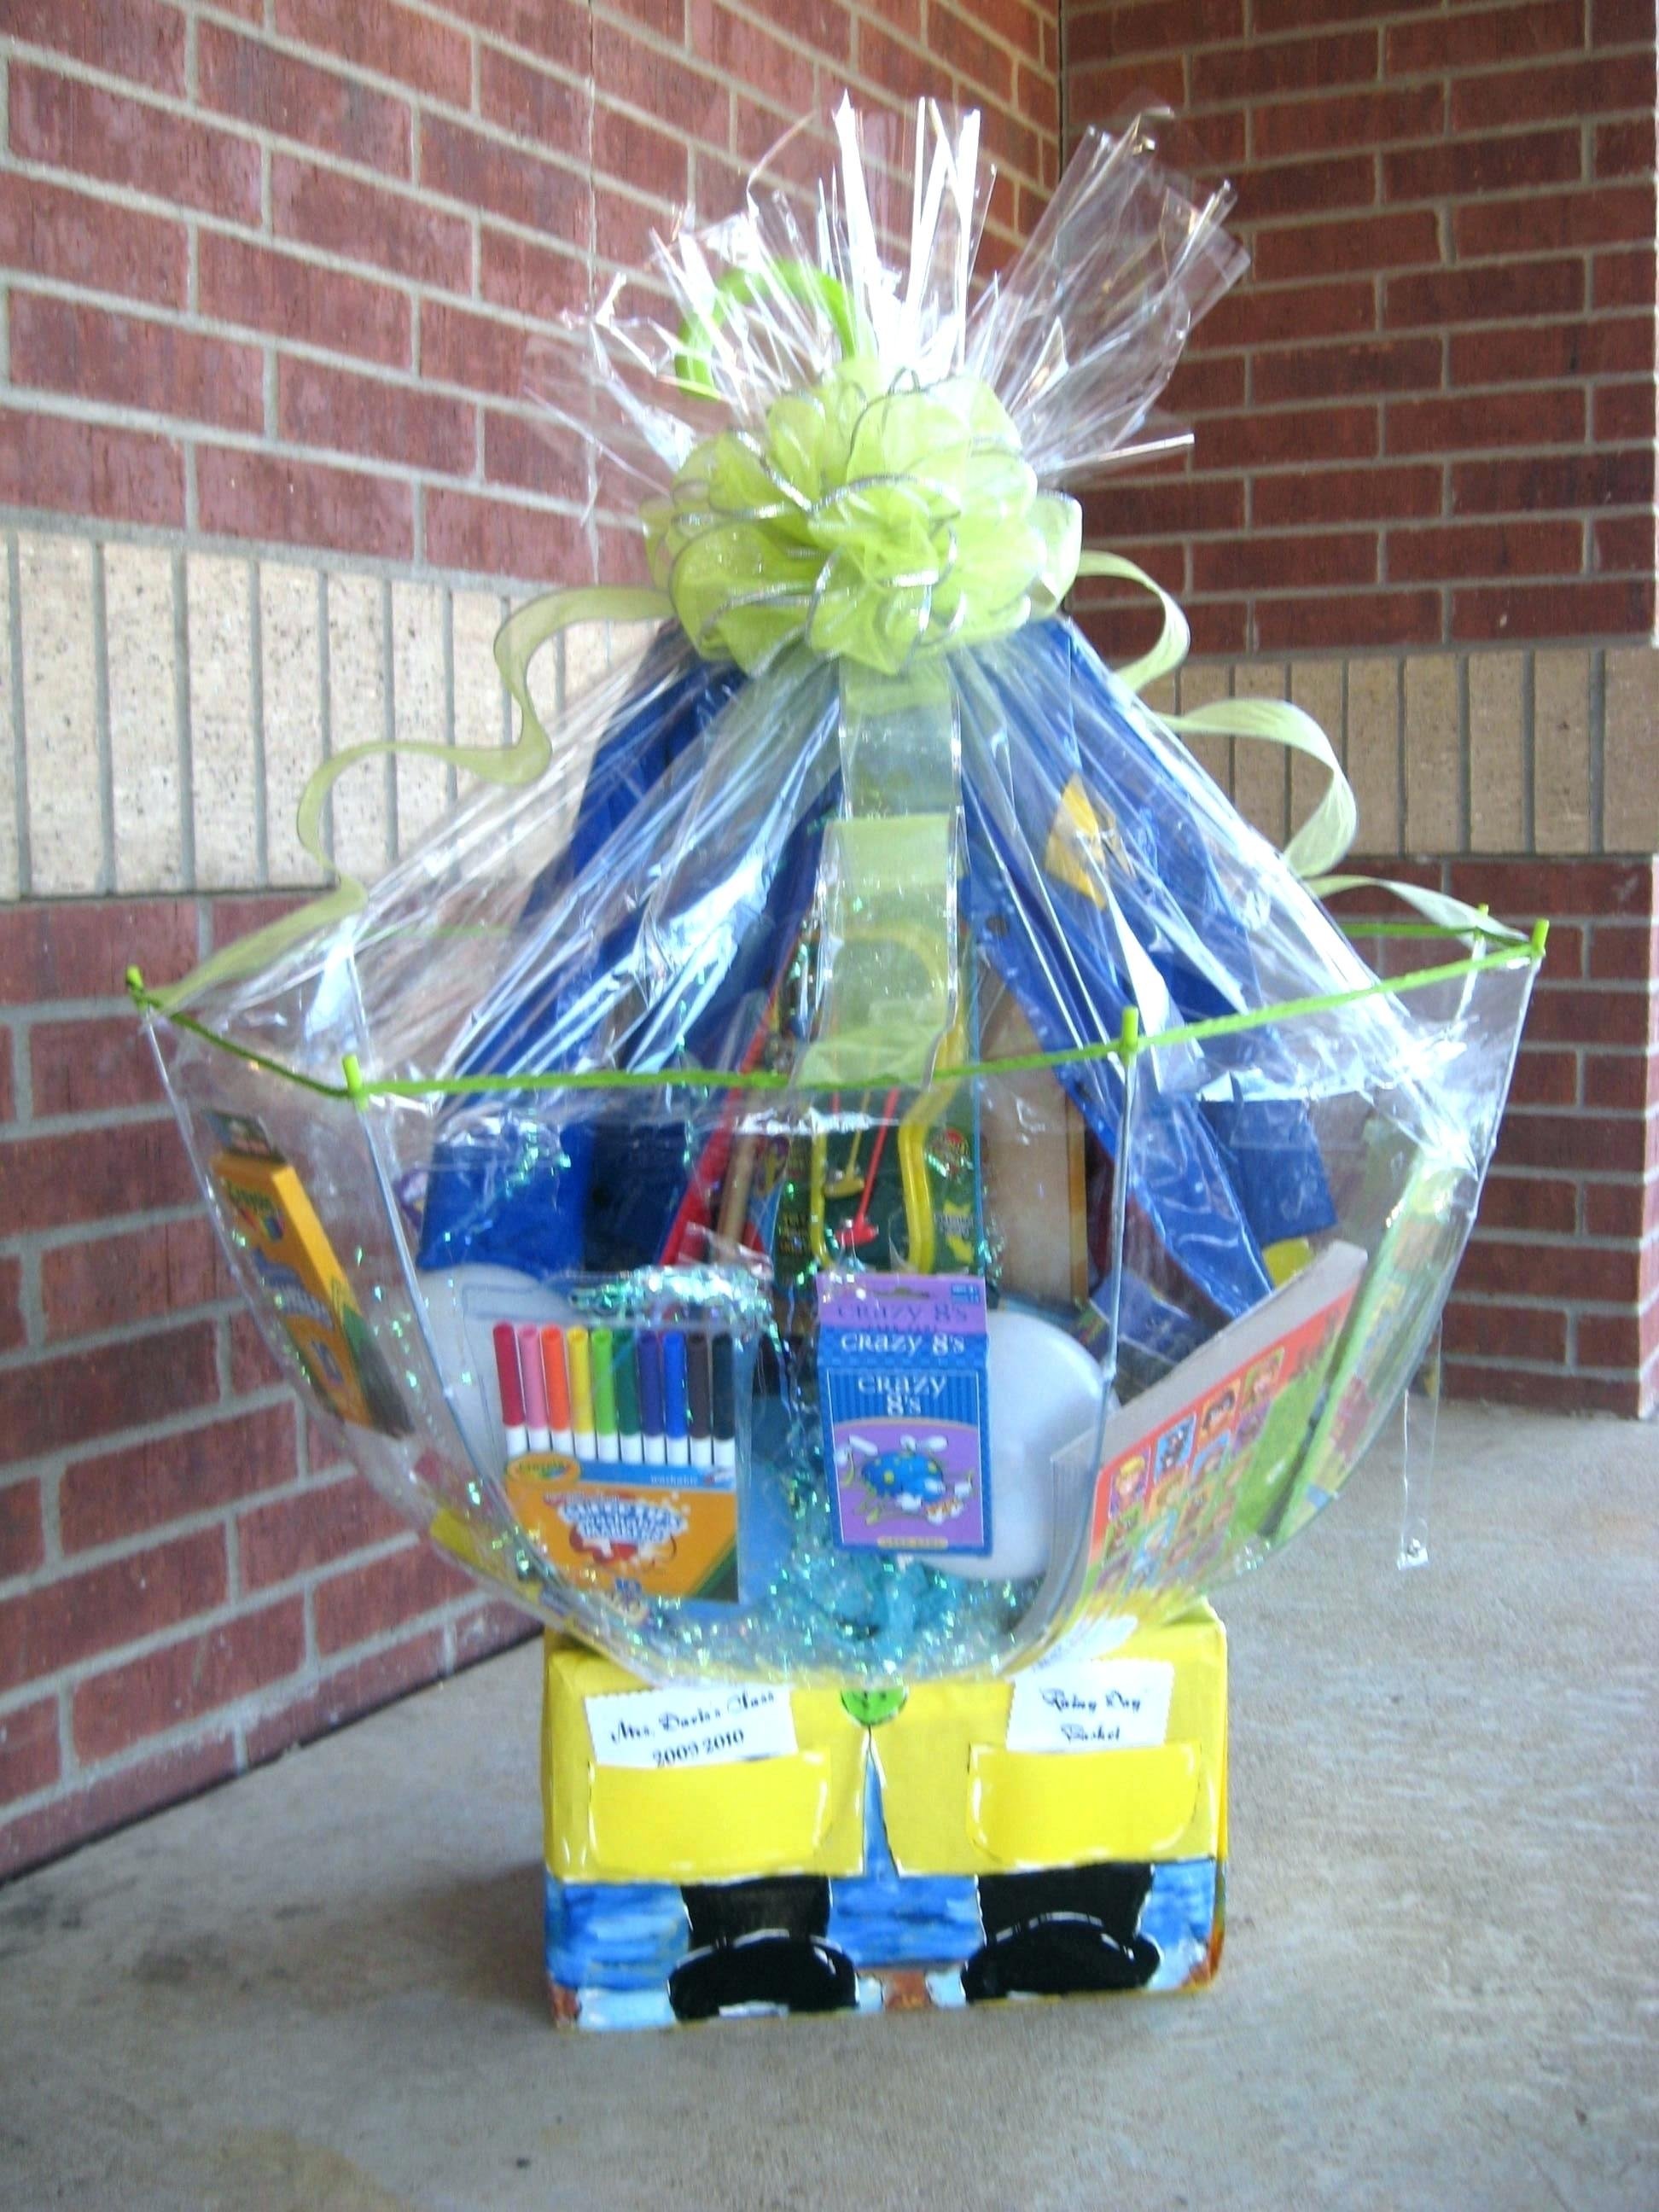 The top 22 Ideas About Ideas for Gift Baskets to Auction Home, Family